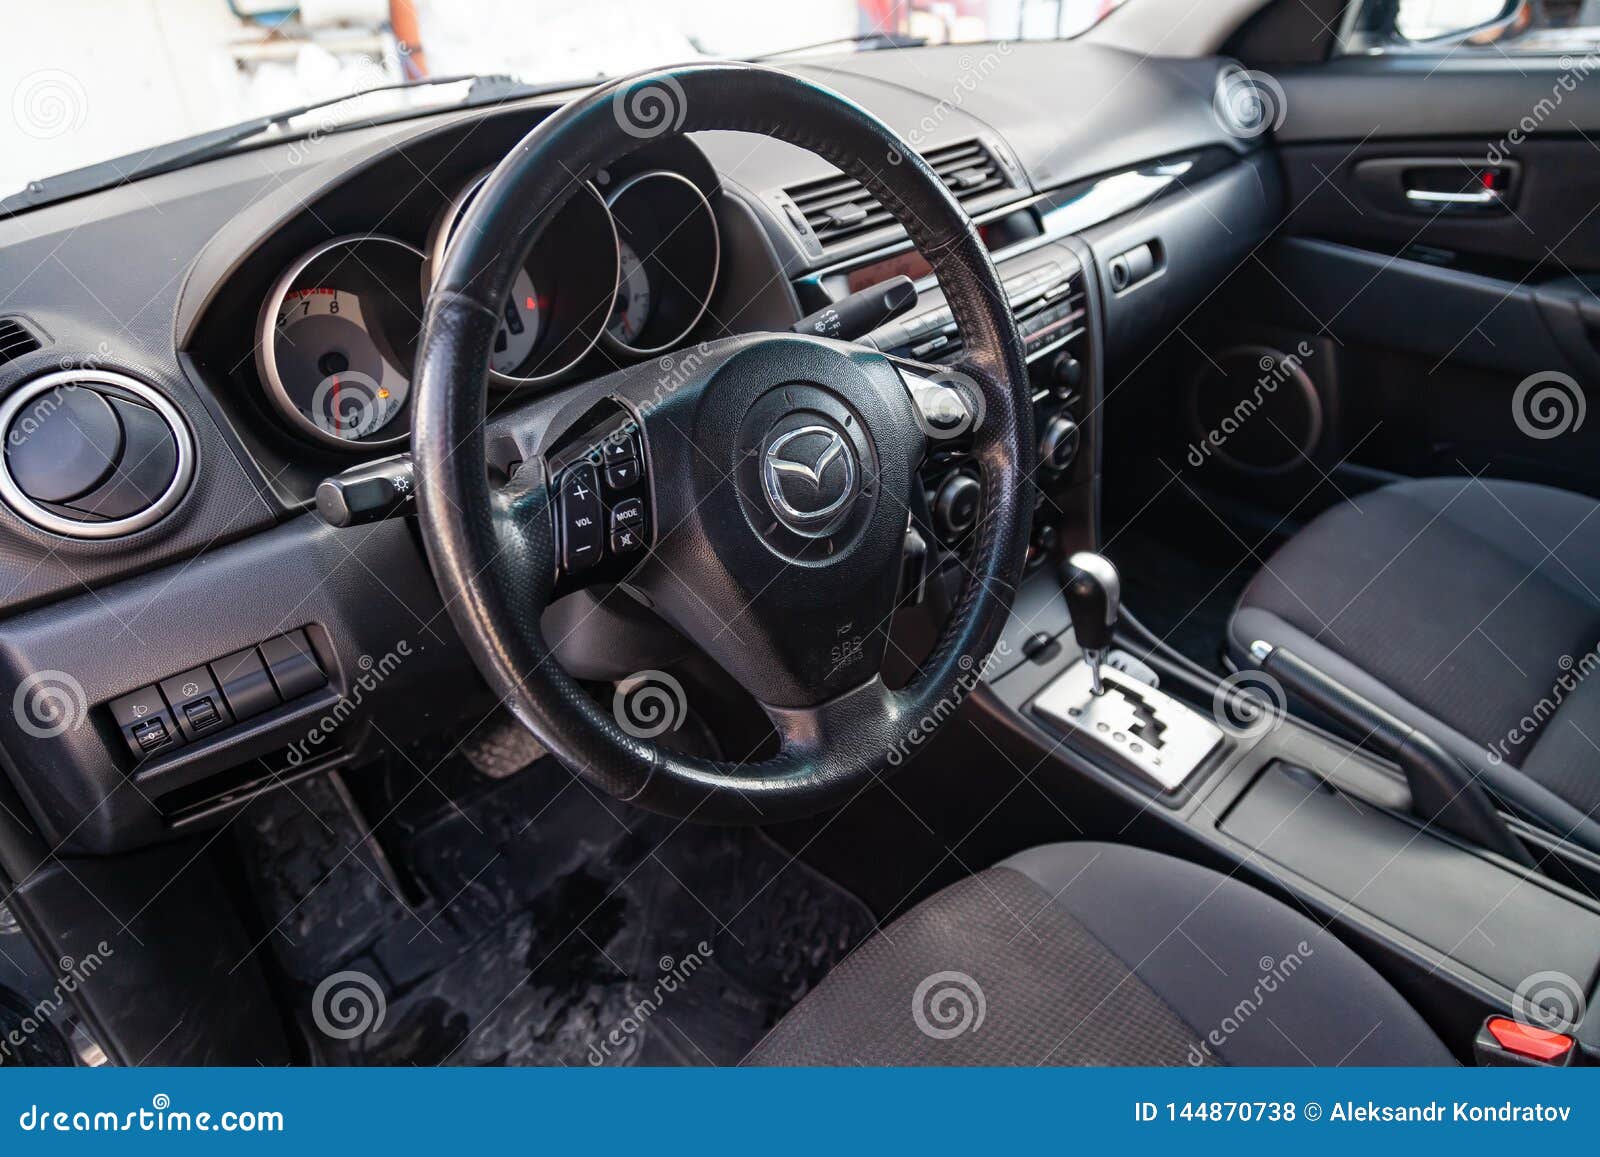 The Interior Of The Car Mazda 3 With A View Of The Steering